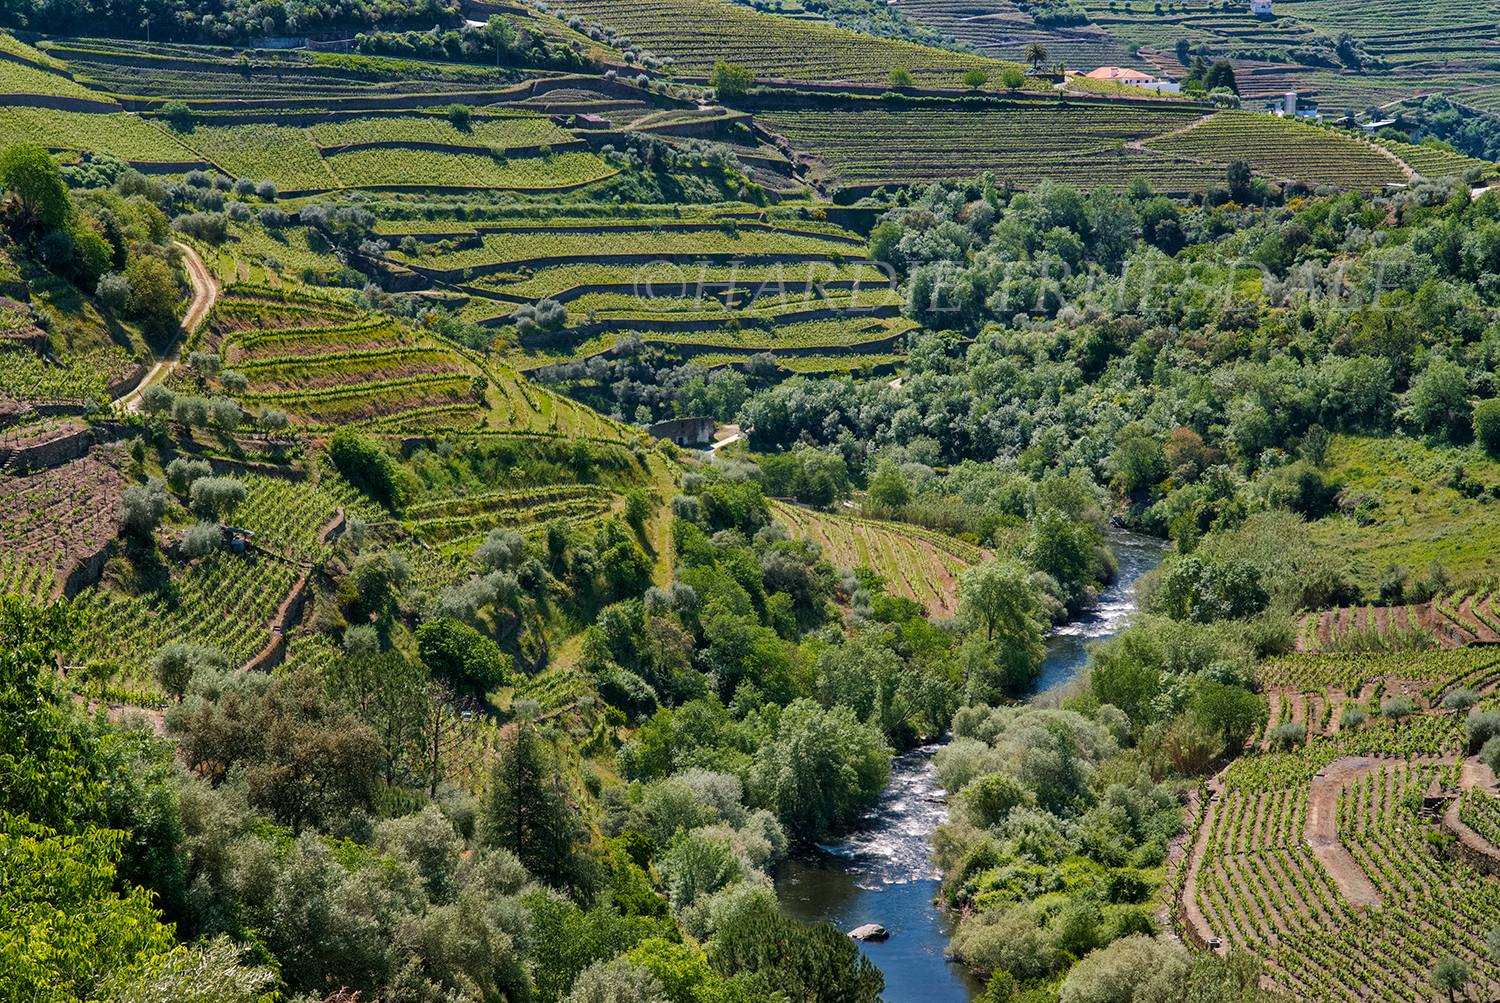 PT#036 "Vineyard Terraces and Olive Trees" Corga River, Douro Valley